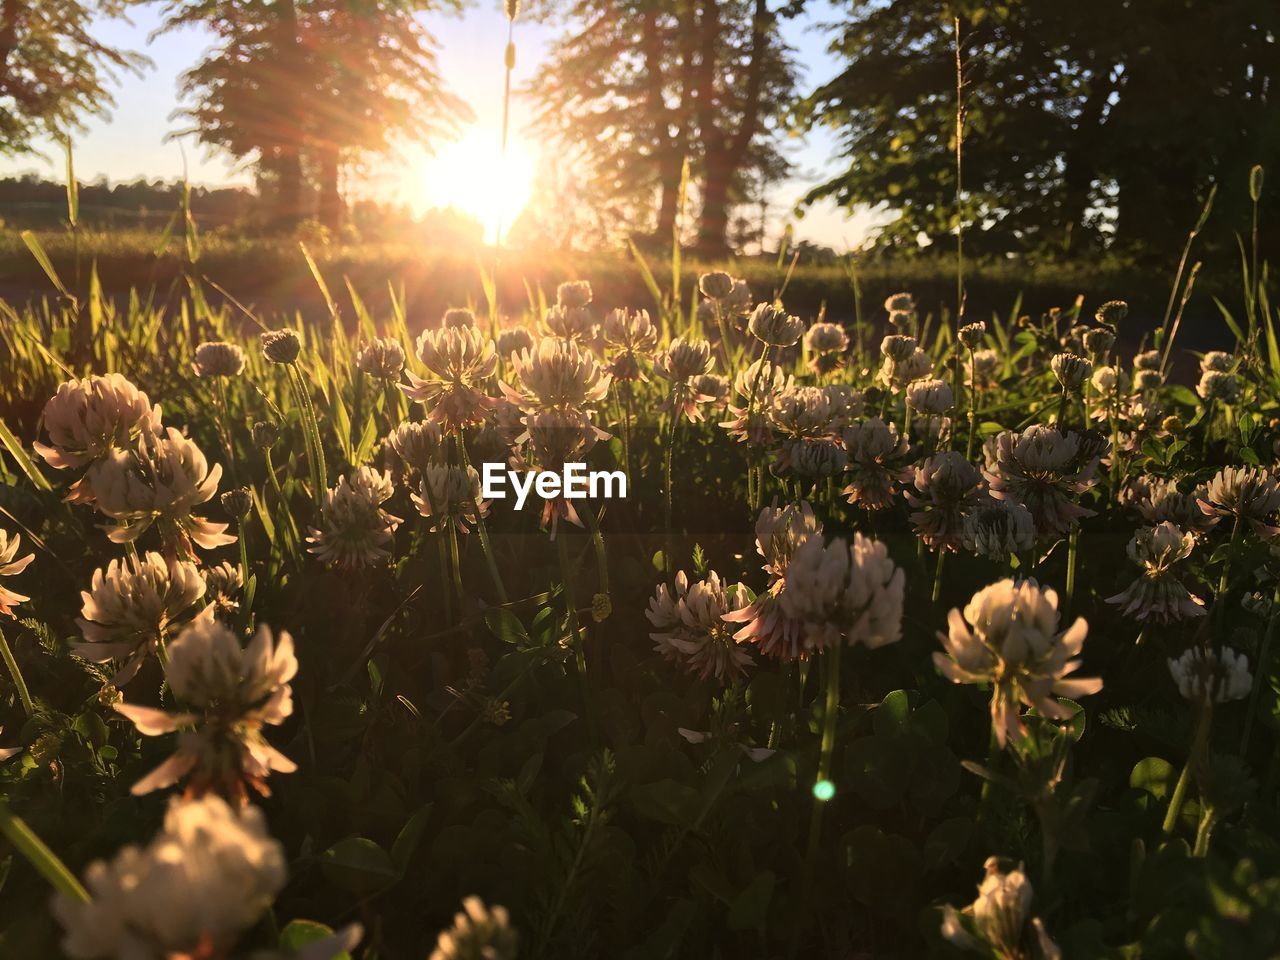 Flowers growing on field against bright sun